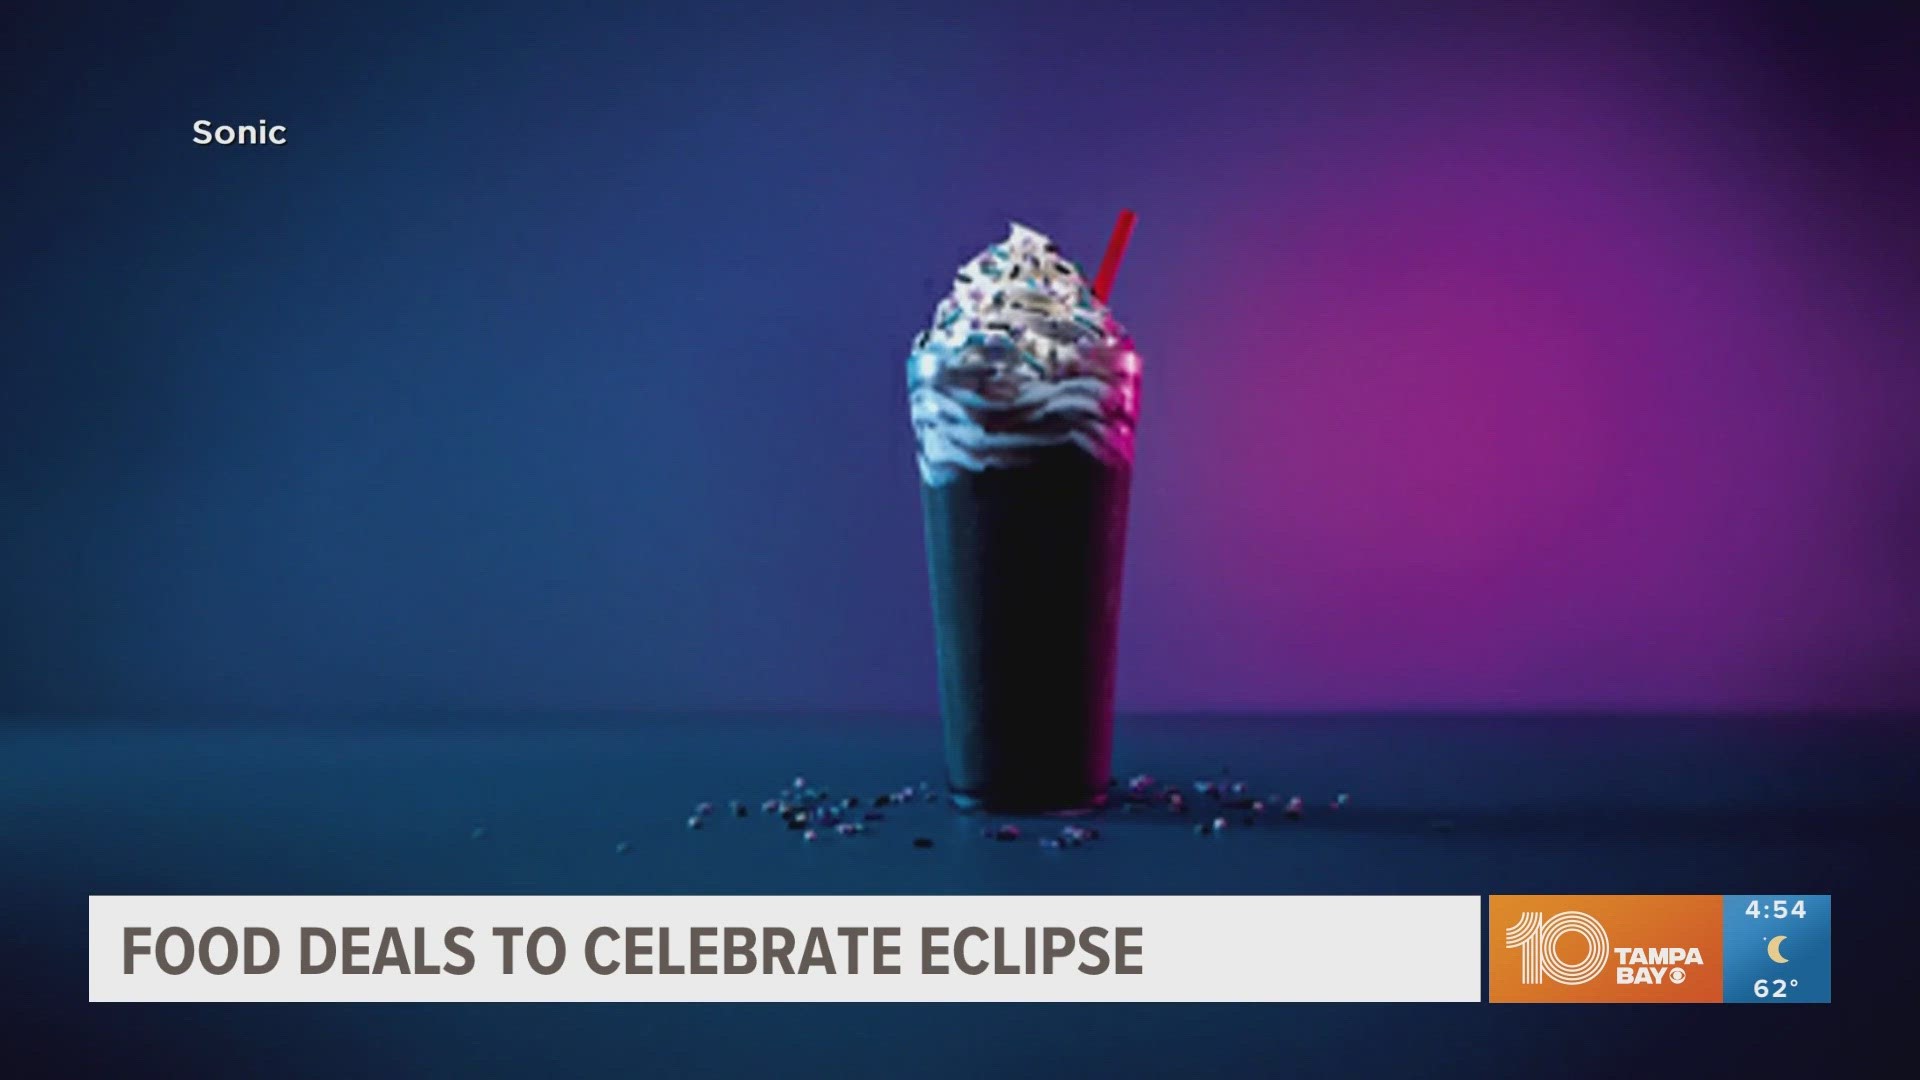 Companies like Krispy Kreme, Sonic and Sun Chips are rolling out special eclipse products.